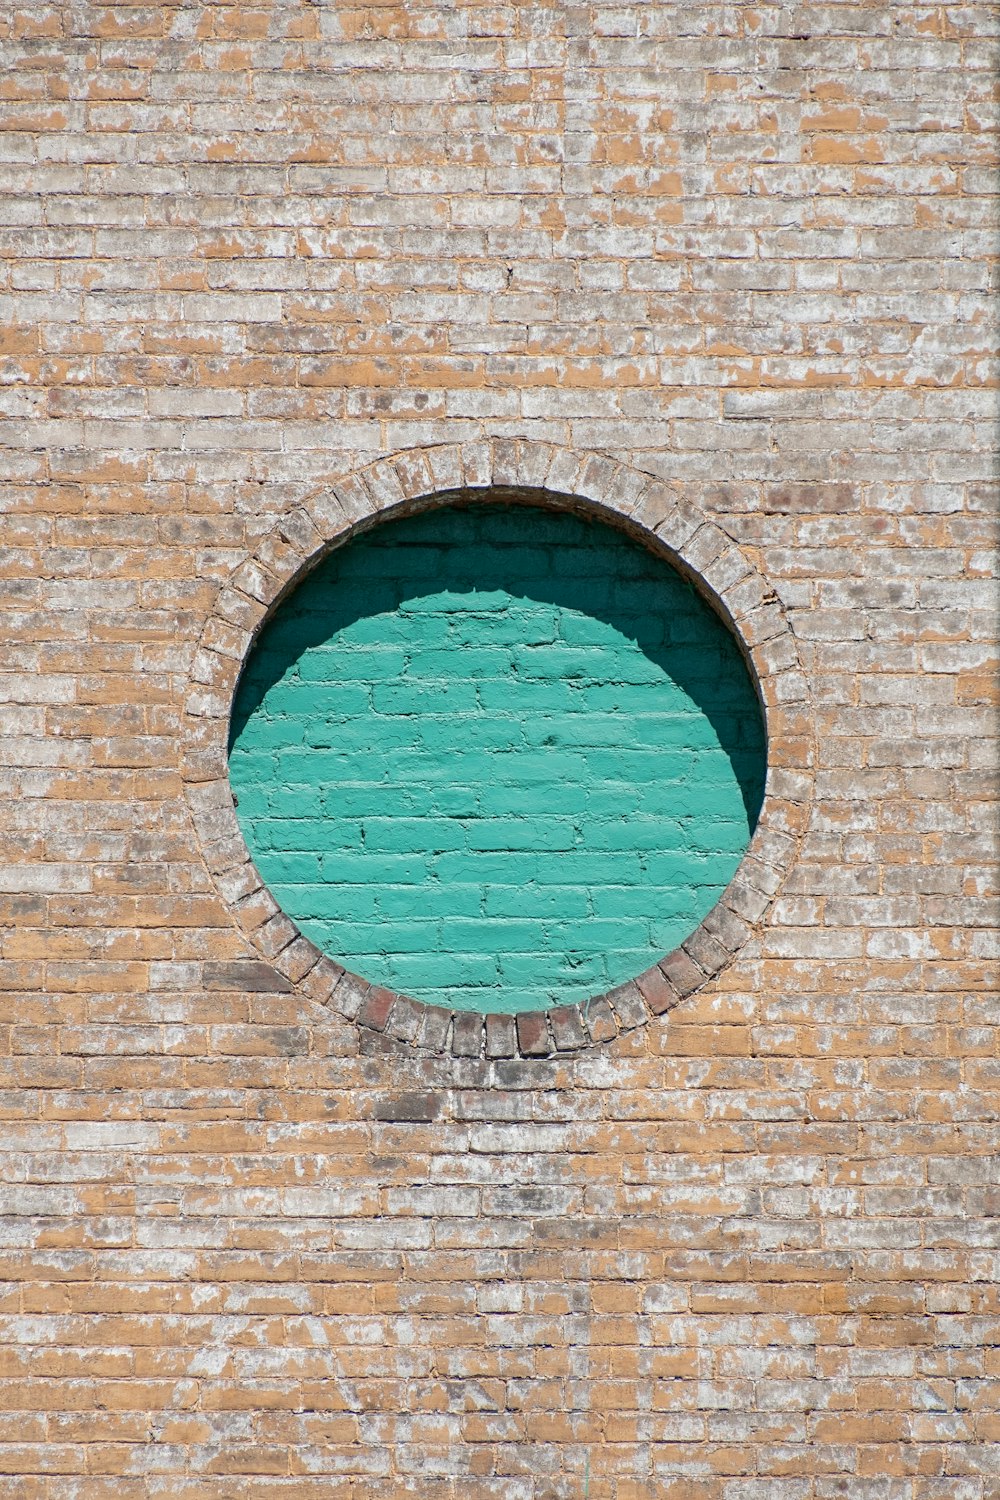 brown brick wall with blue round glass window